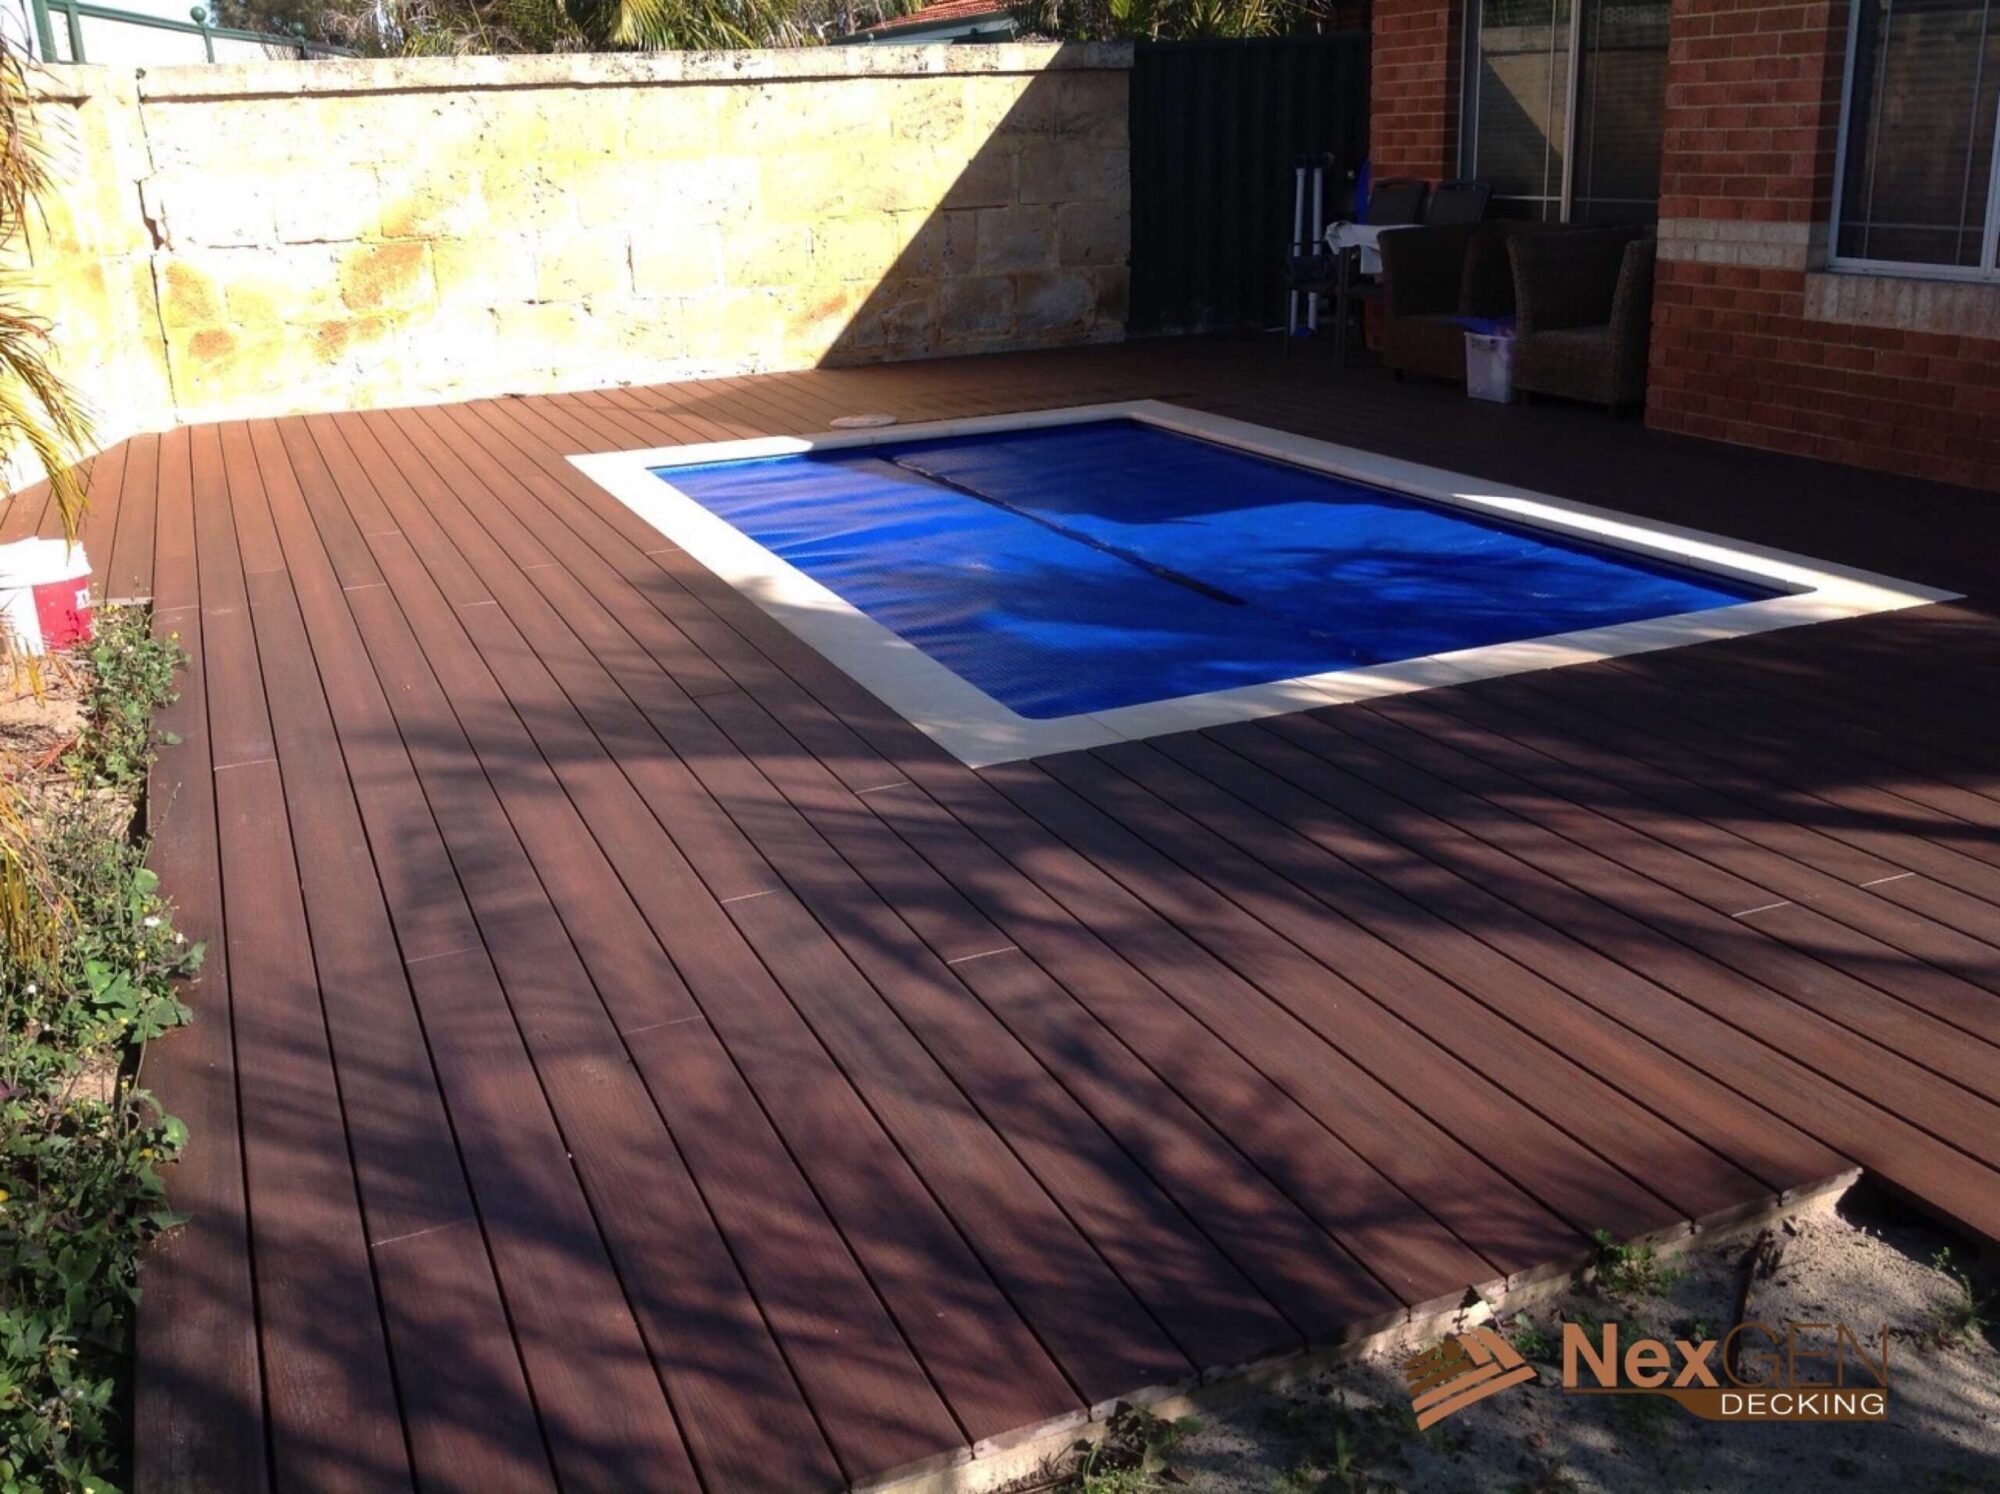 The Best Decking Materials Suited for the Australian Climate